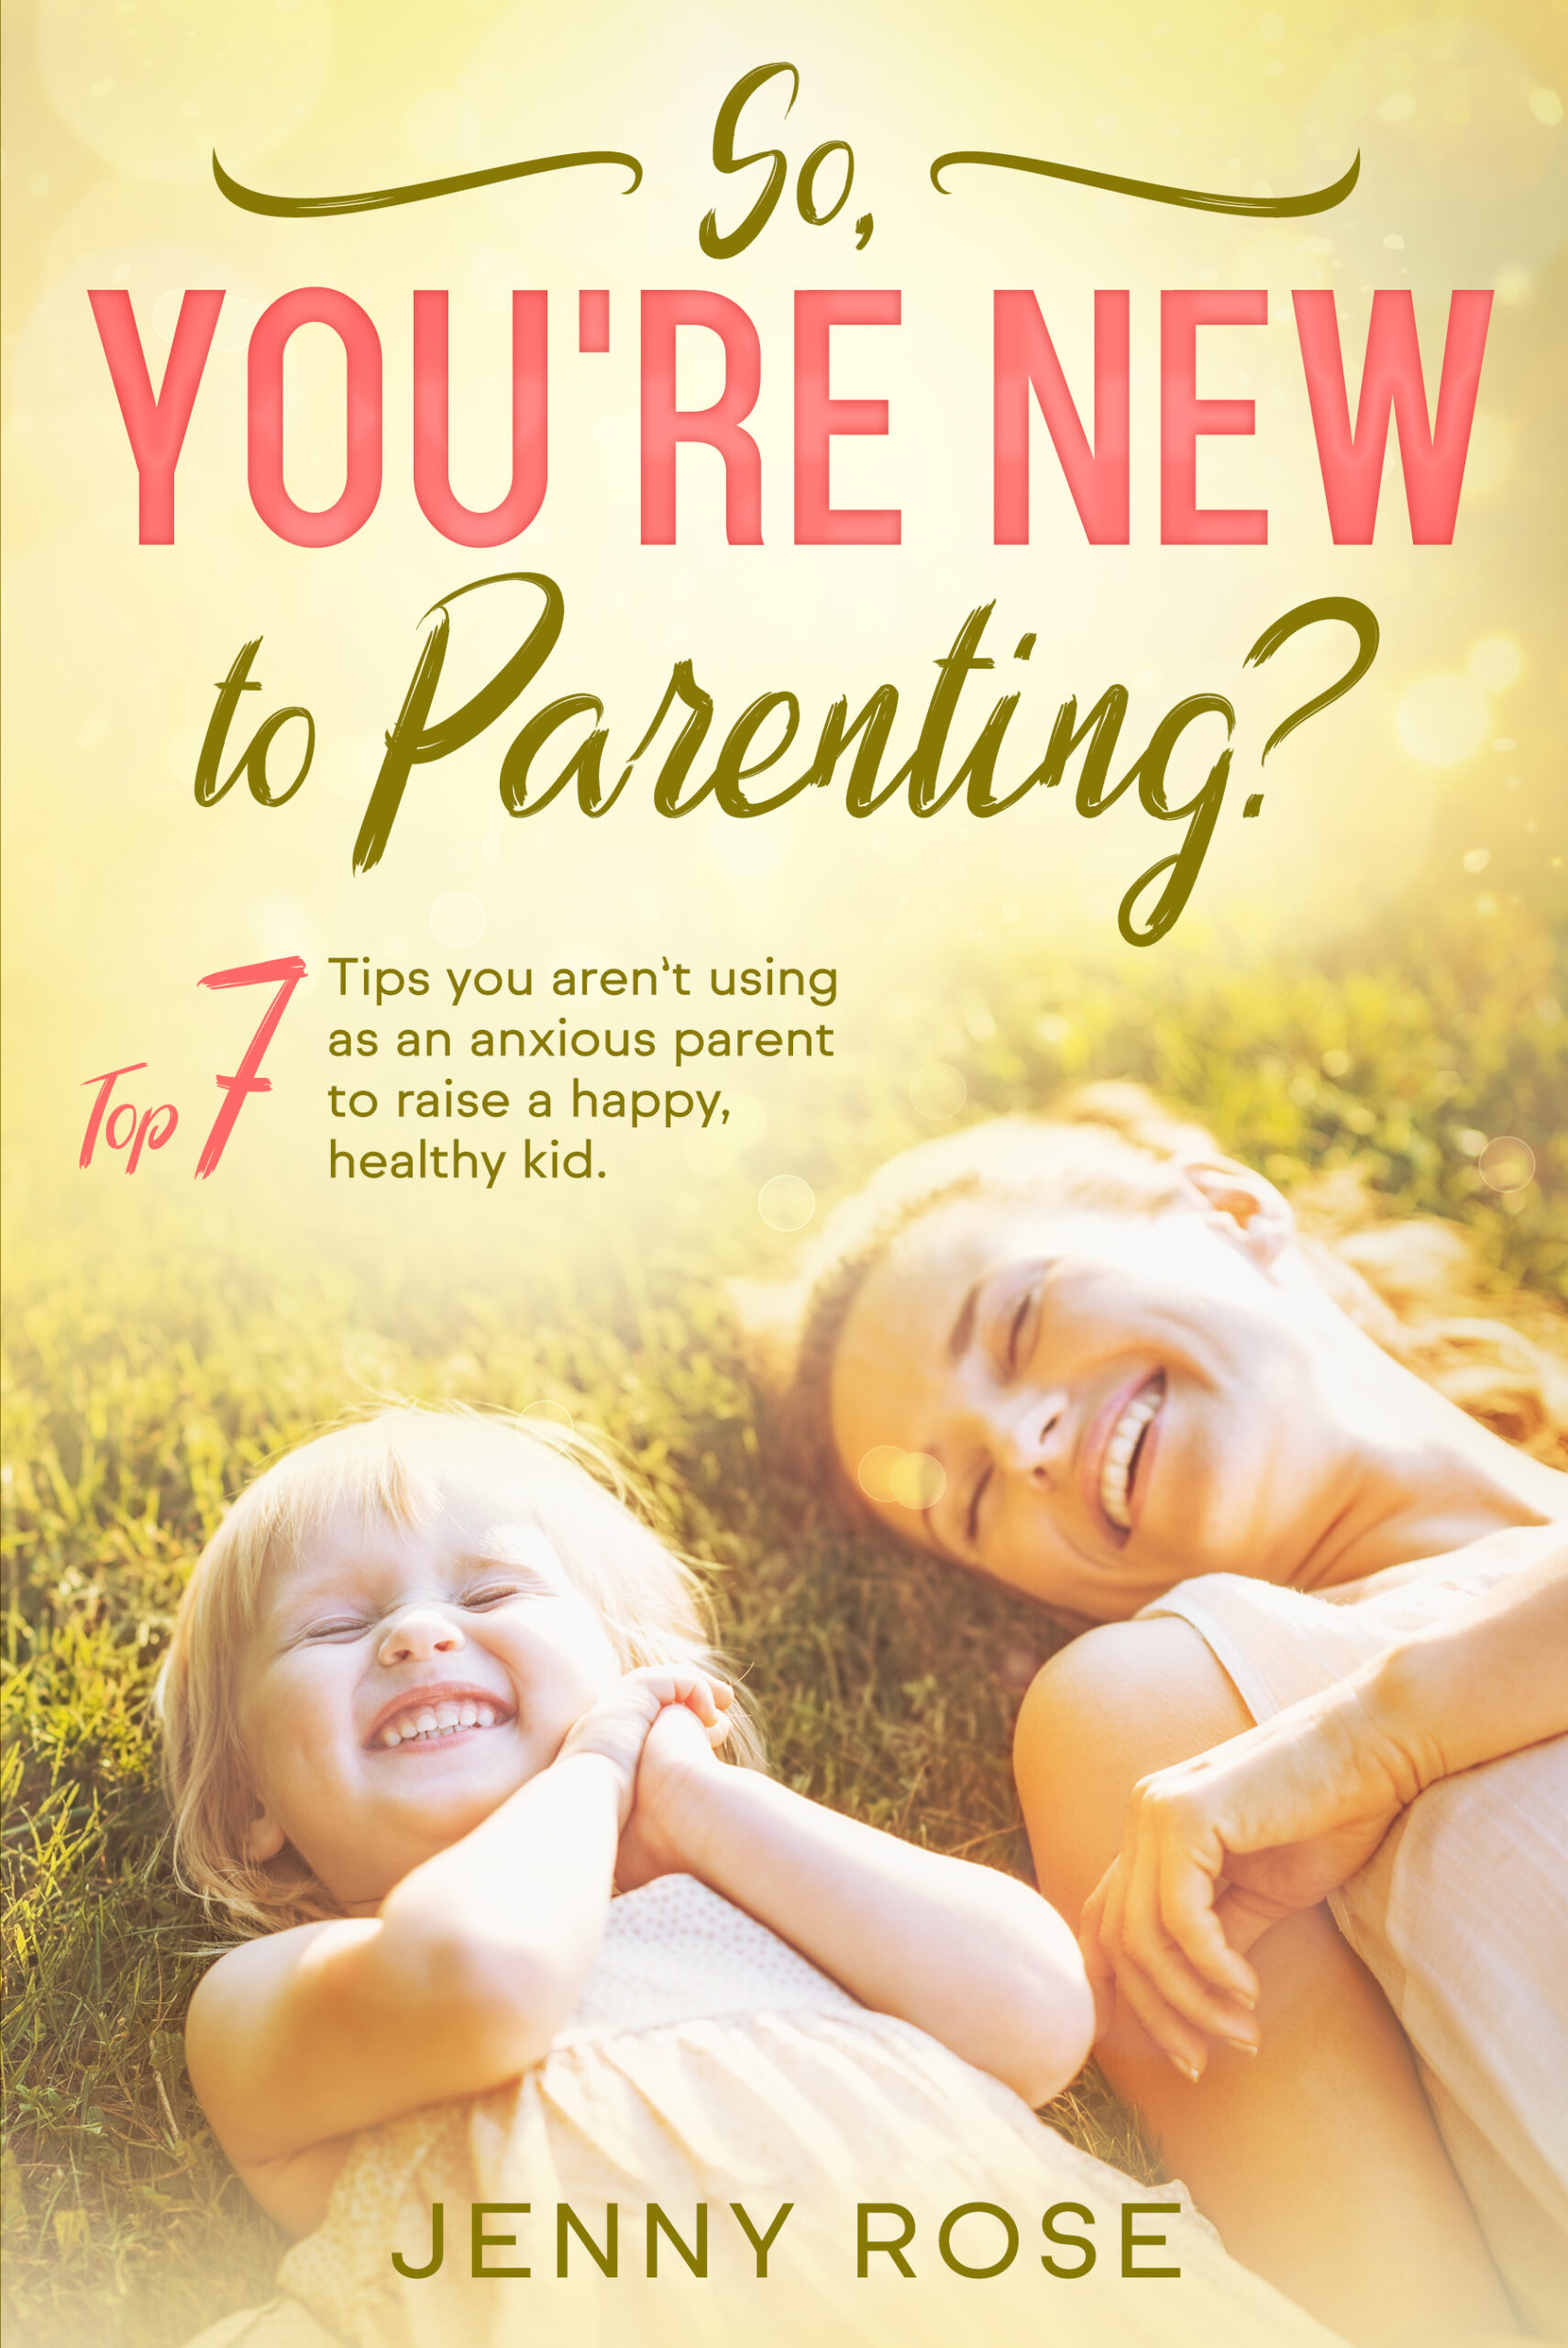 FREE: So, You’re new to parenting? by Jenny Rose